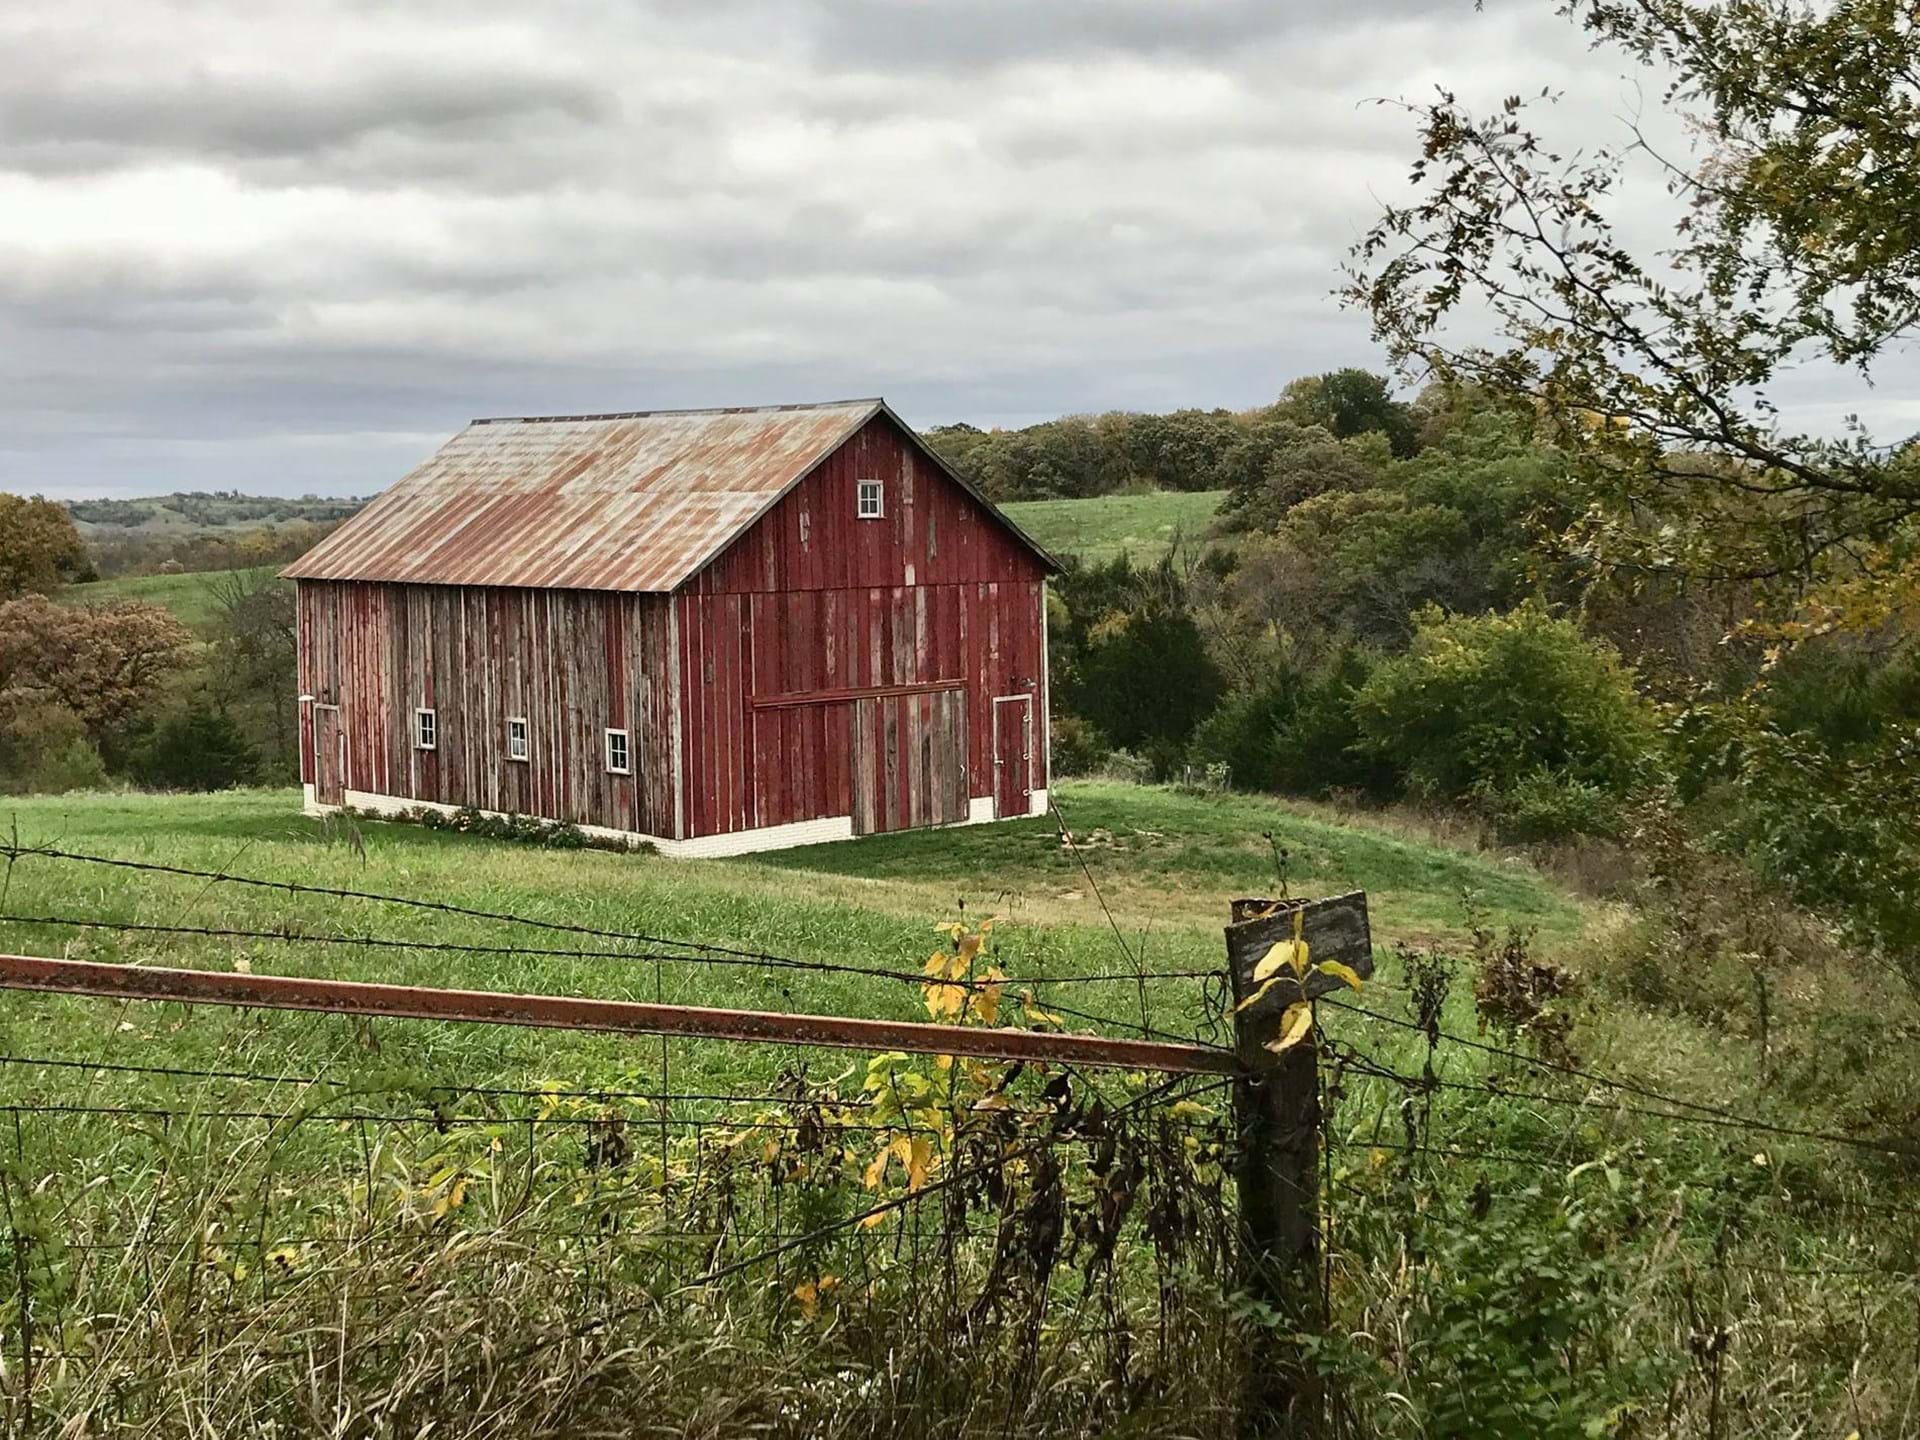 Our barn was salvaged and moved from another farm right here in Madison County. It is an 1850's hand-hewn oak structure where we host dinners, classes, concerts and more!